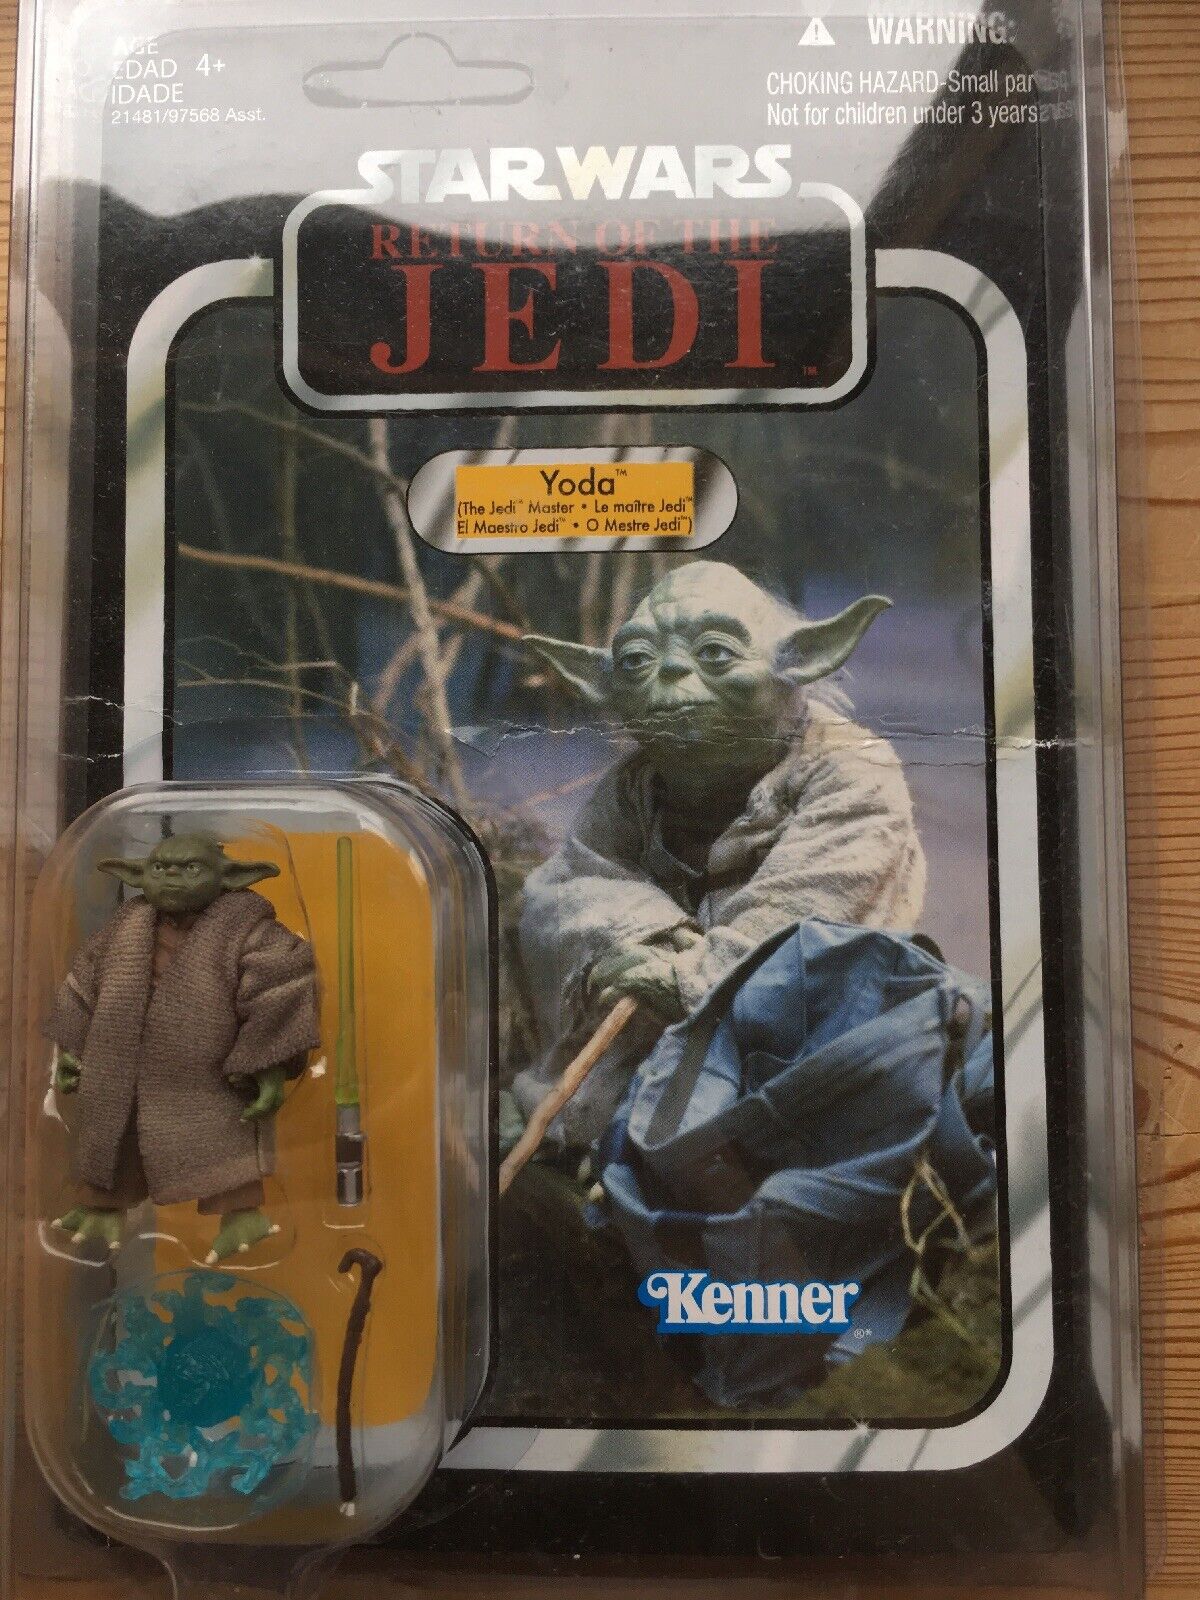 Collection n°182: janosolo kenner hasbro - Page 20 Image%2F1409024%2F20231104%2Fob_c235a1_yoda-canadian-canada-version-vc20